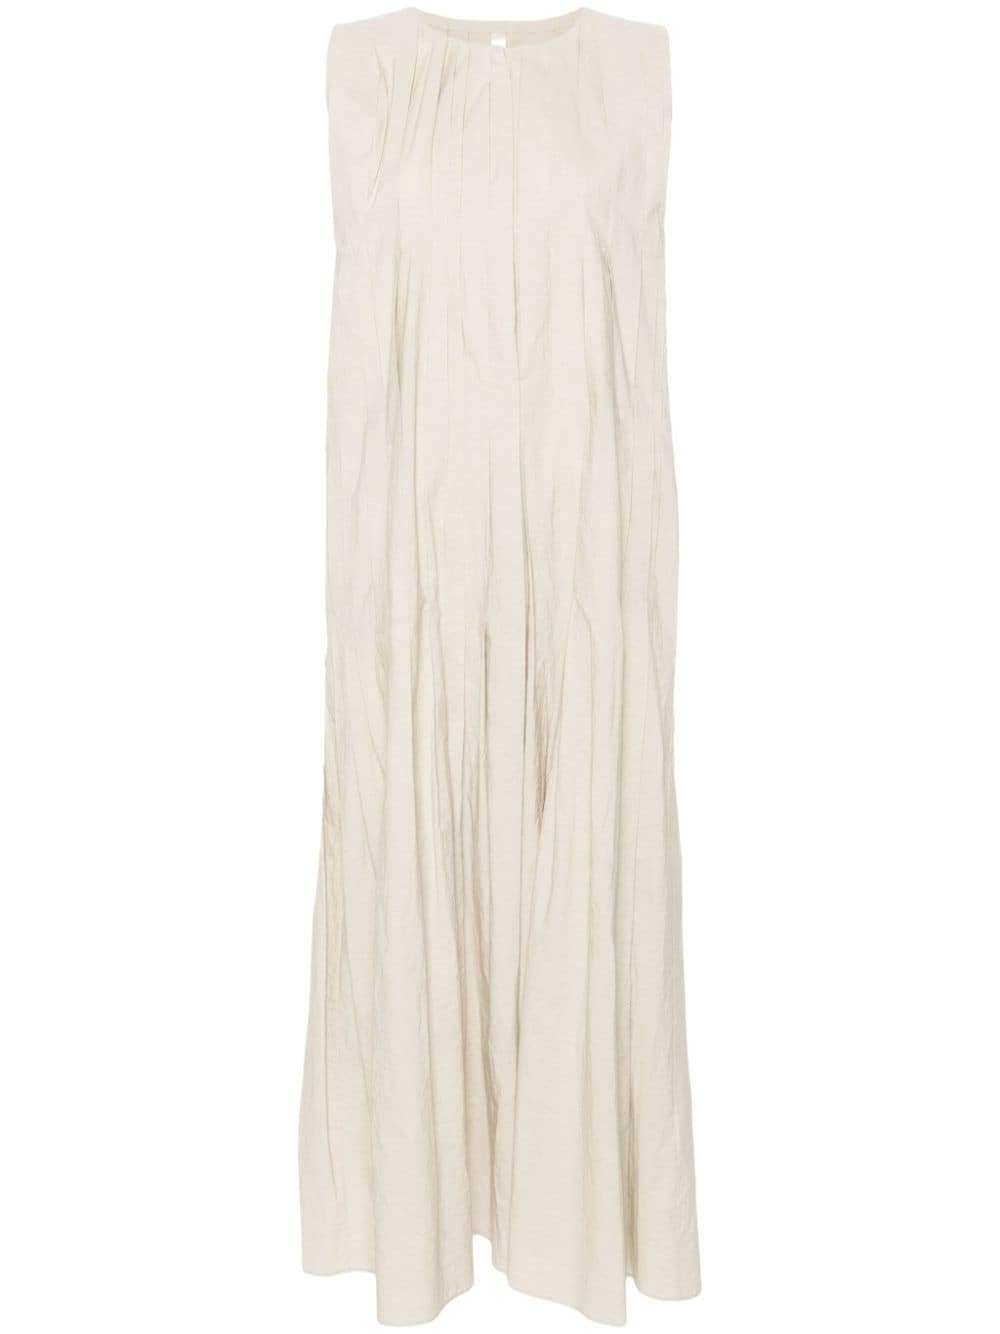 Lauren Manoogian Pintucked Crinkled Cotton And Linen-blend Maxi Dress In Cream